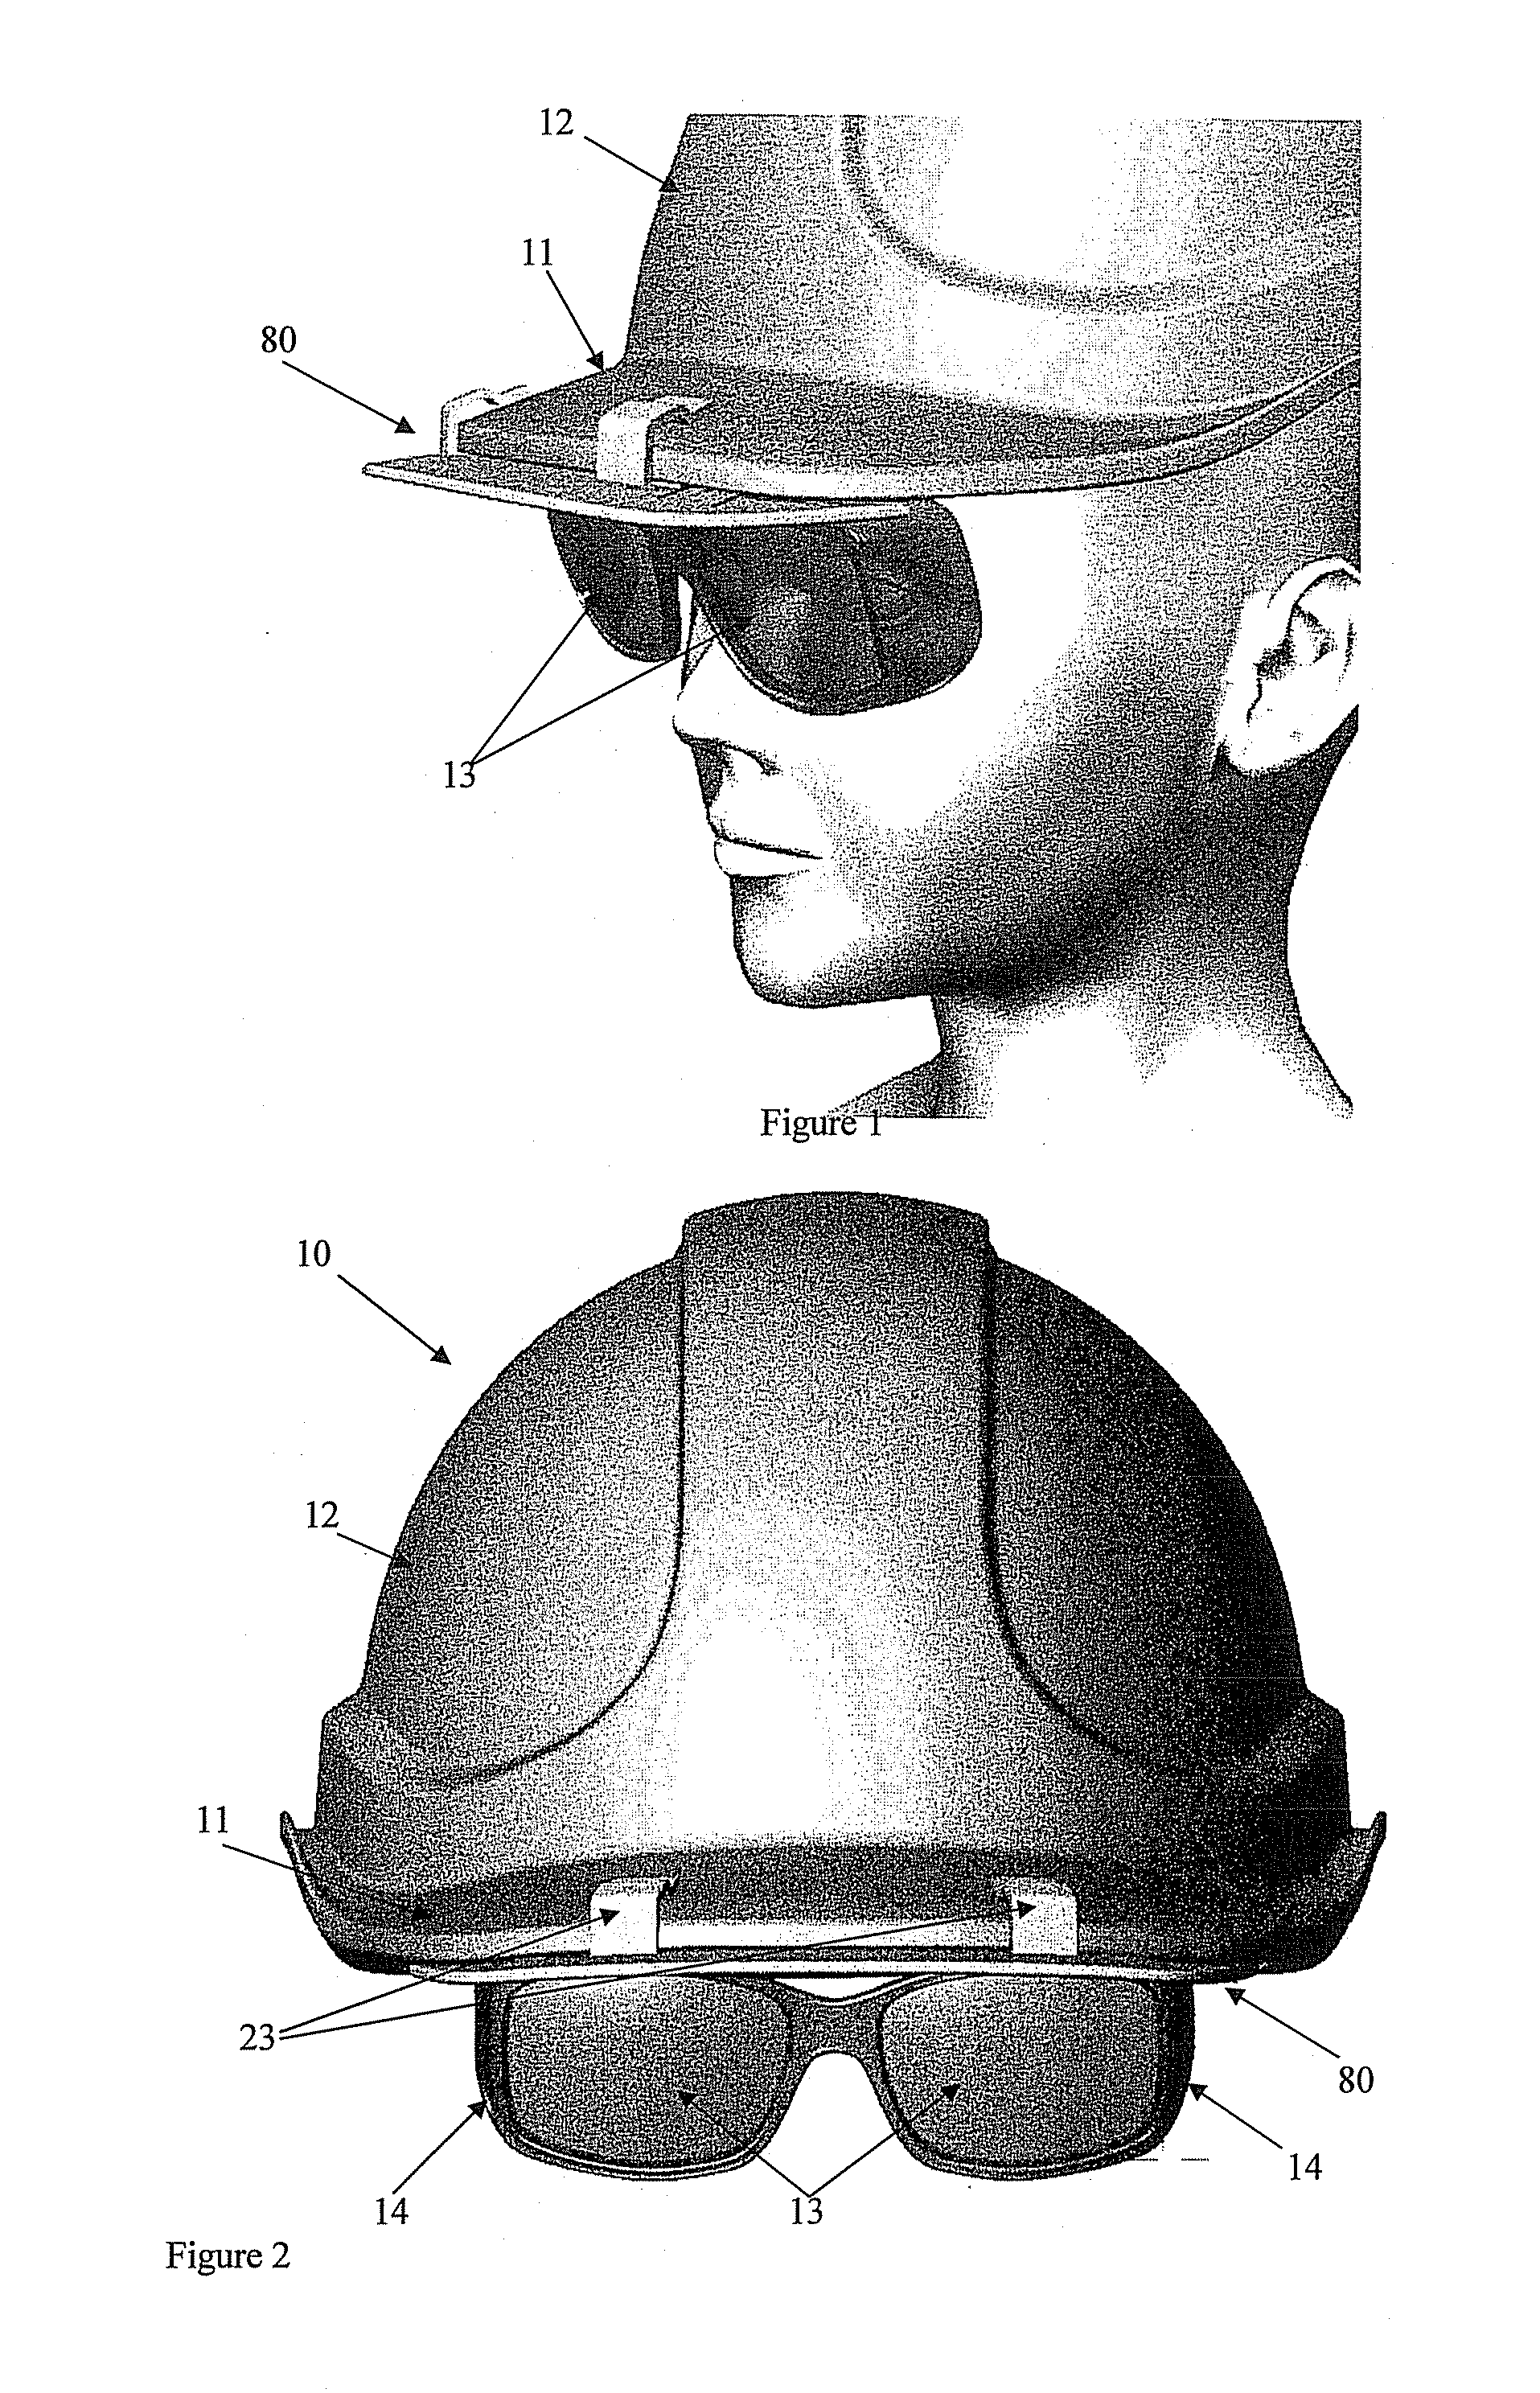 Eyewear assembly for attachment to a hard hat